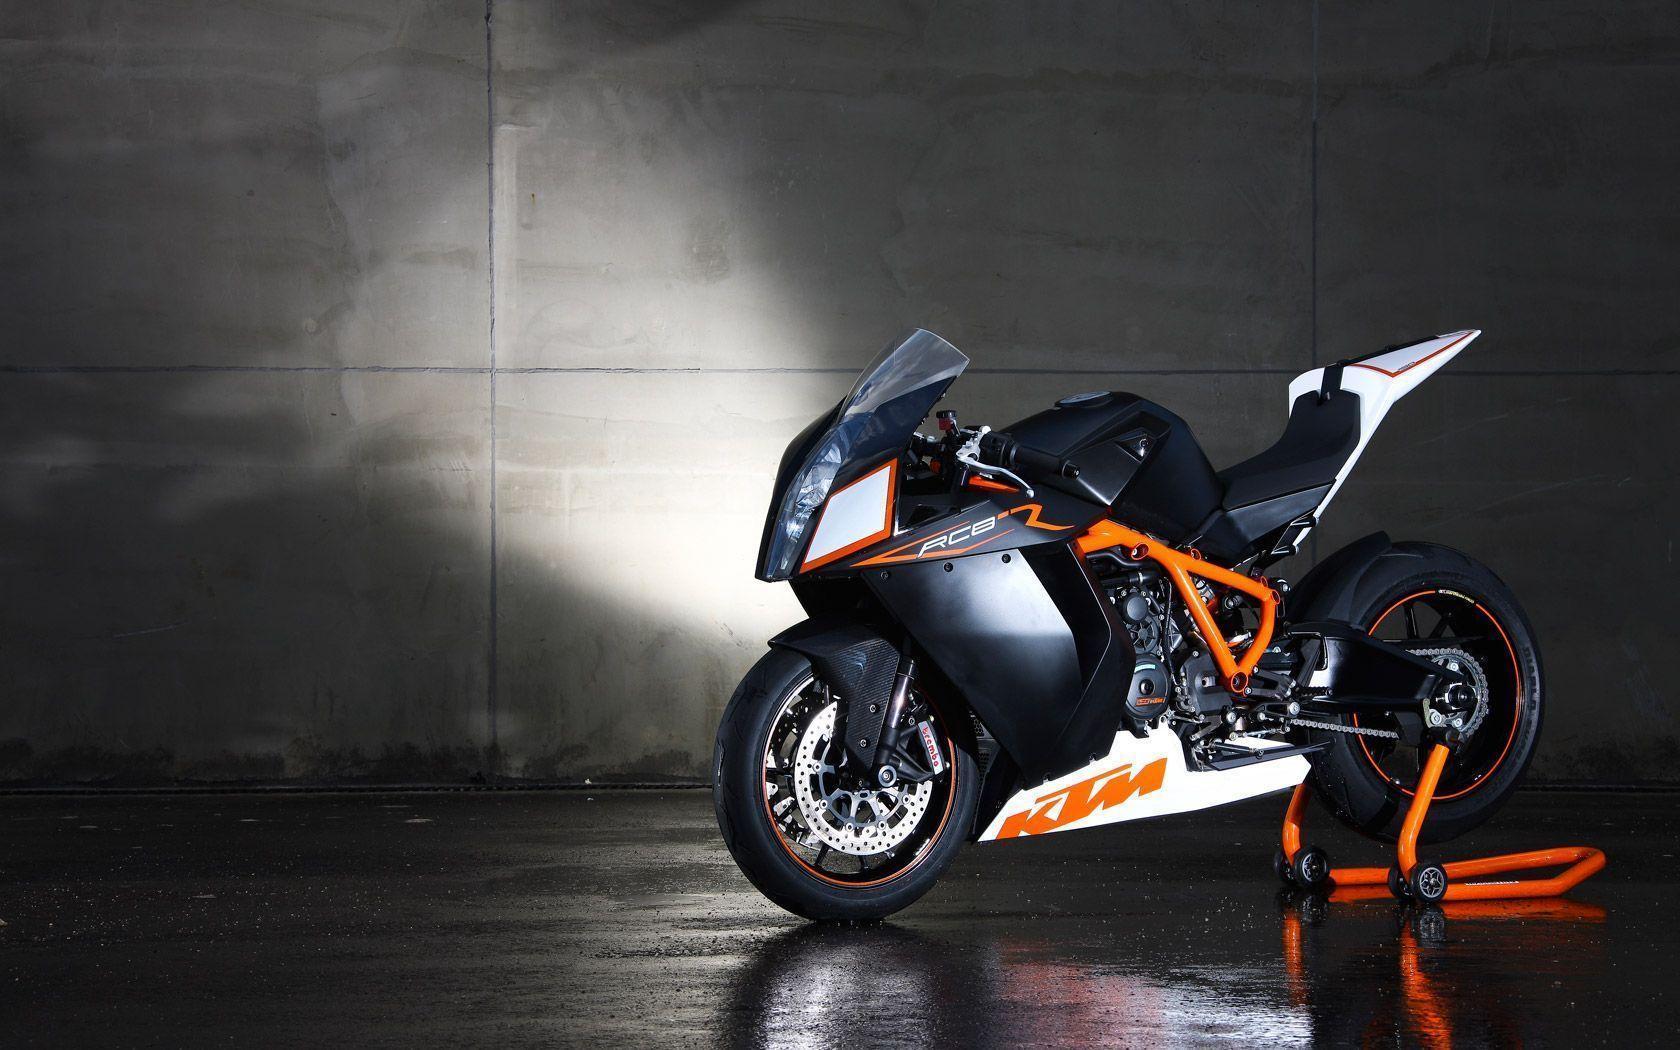 KTM RC8 R High Resolution Wallpaper. A Long And Perilous Voyage